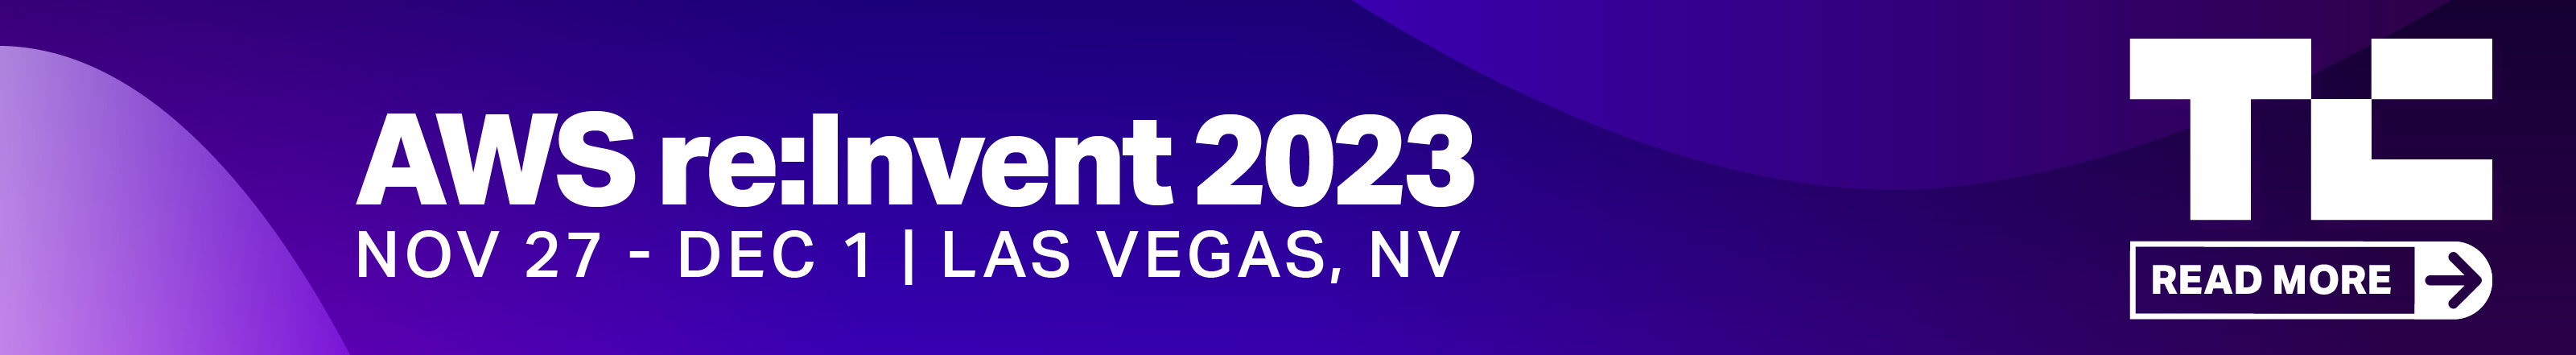 Read more about AWS re: Invent 2023 at TechCrunch